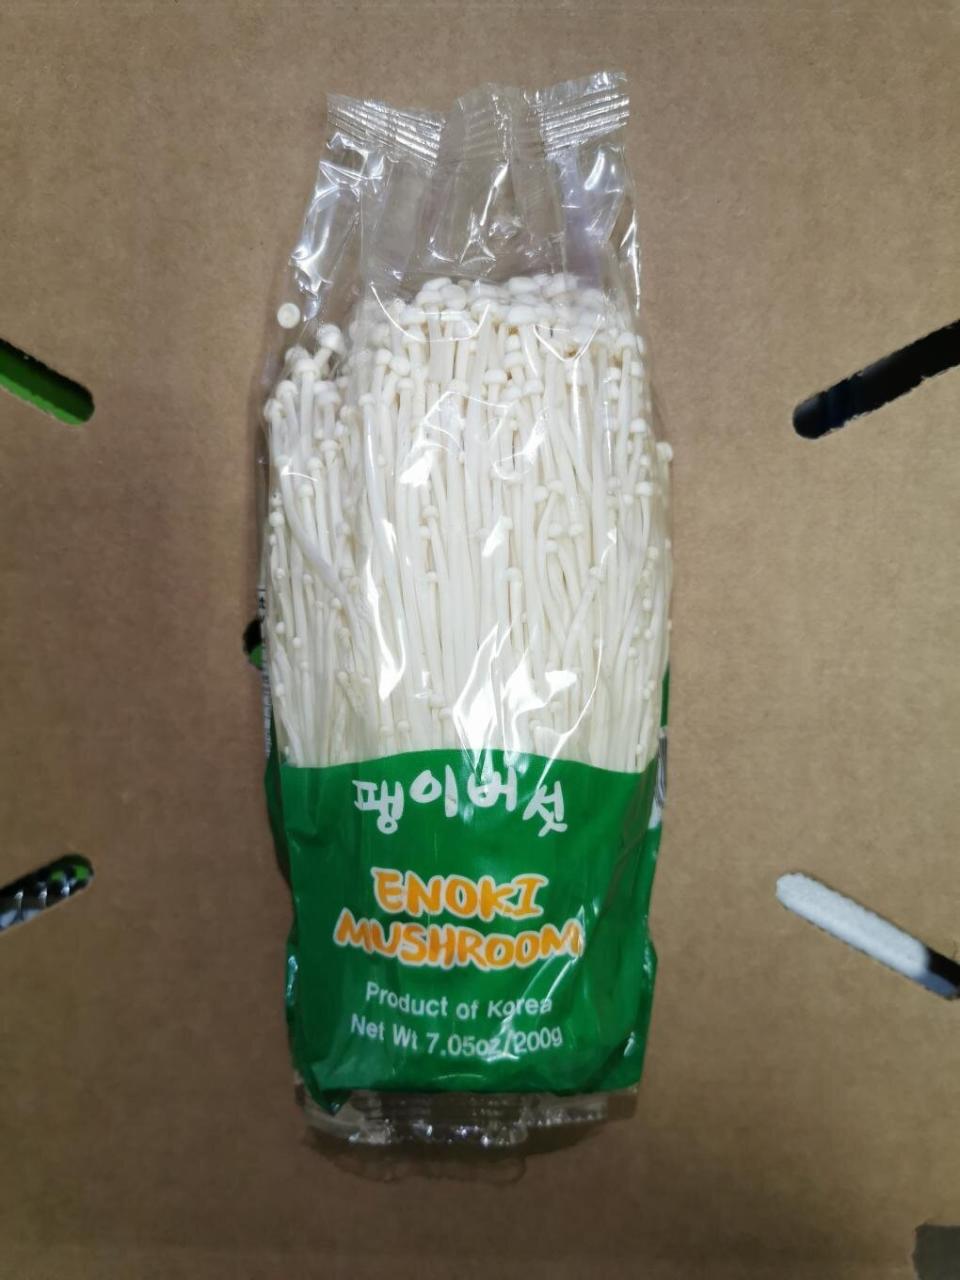 Enoki mushrooms sold by Sun Hong Foods are being recalled for potential listeria contamination. (Photo: FDA)